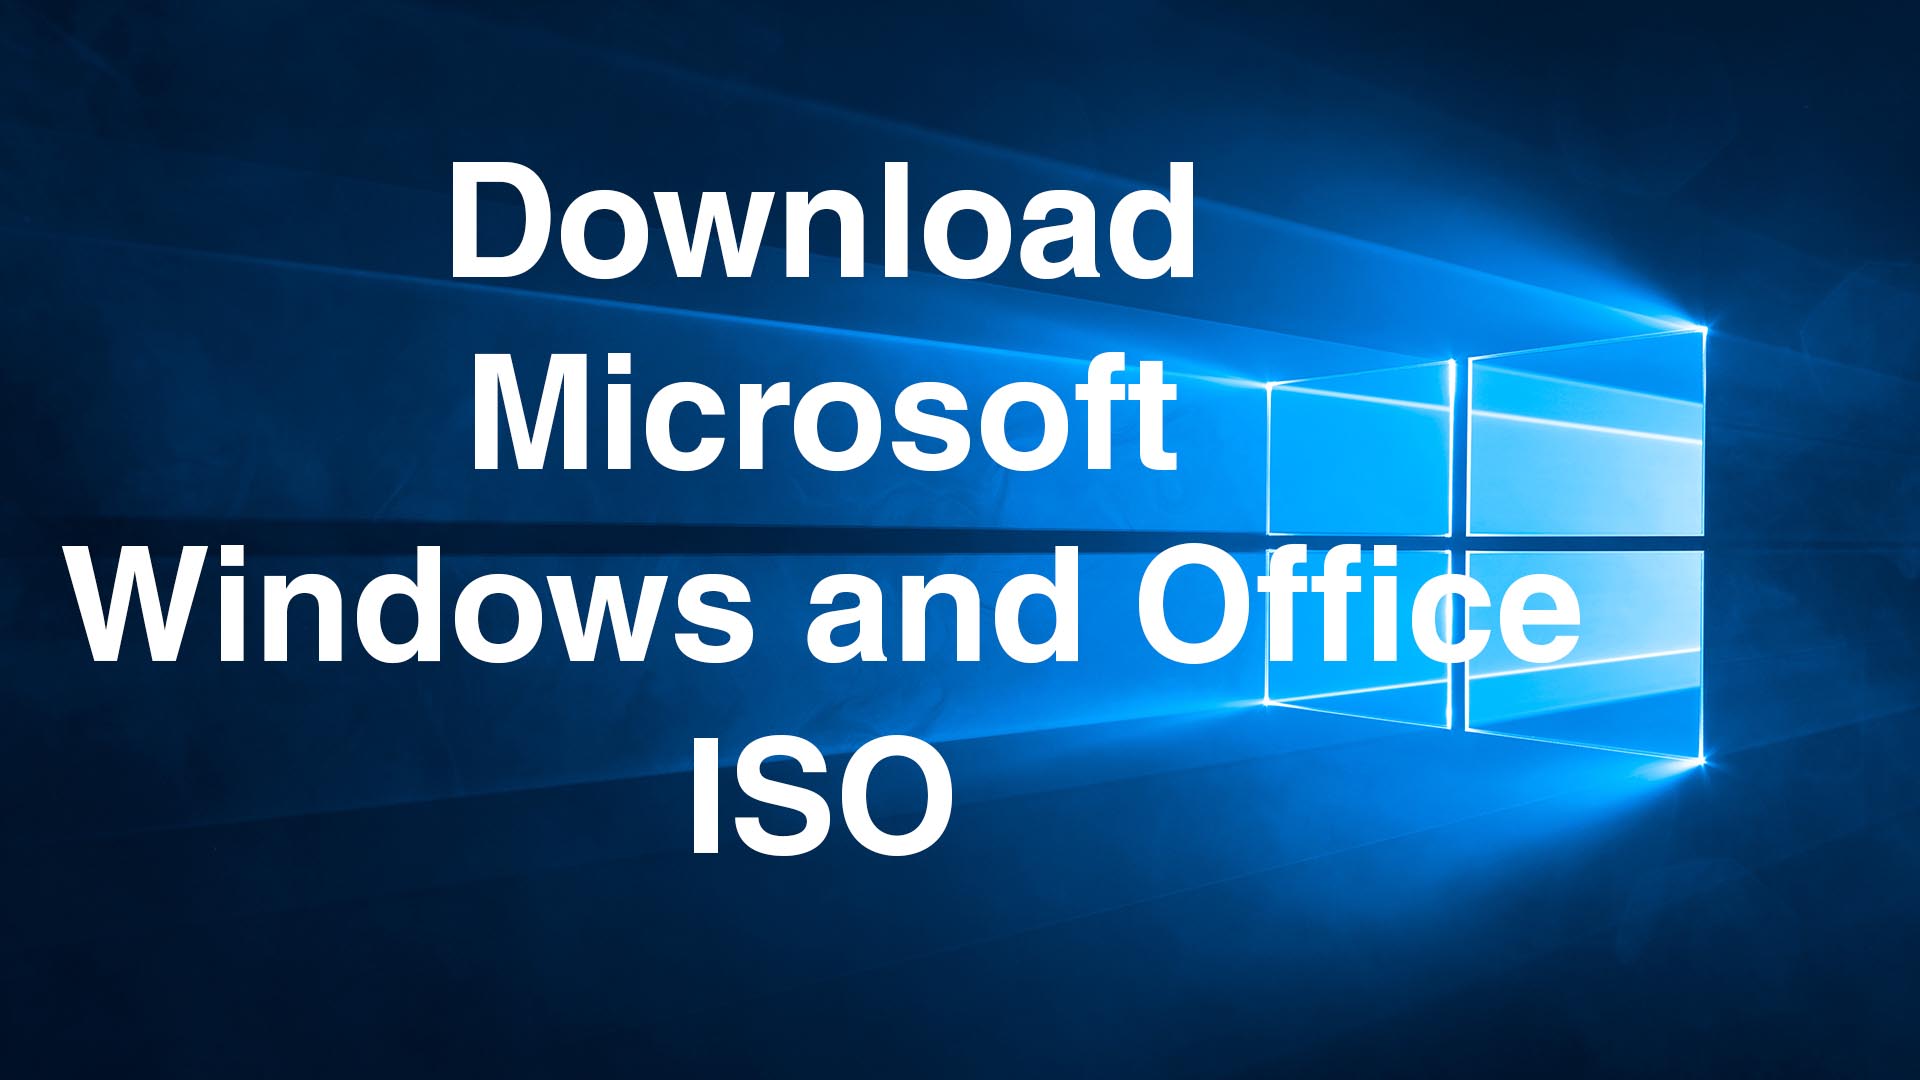 mac os iso file download for windows 10